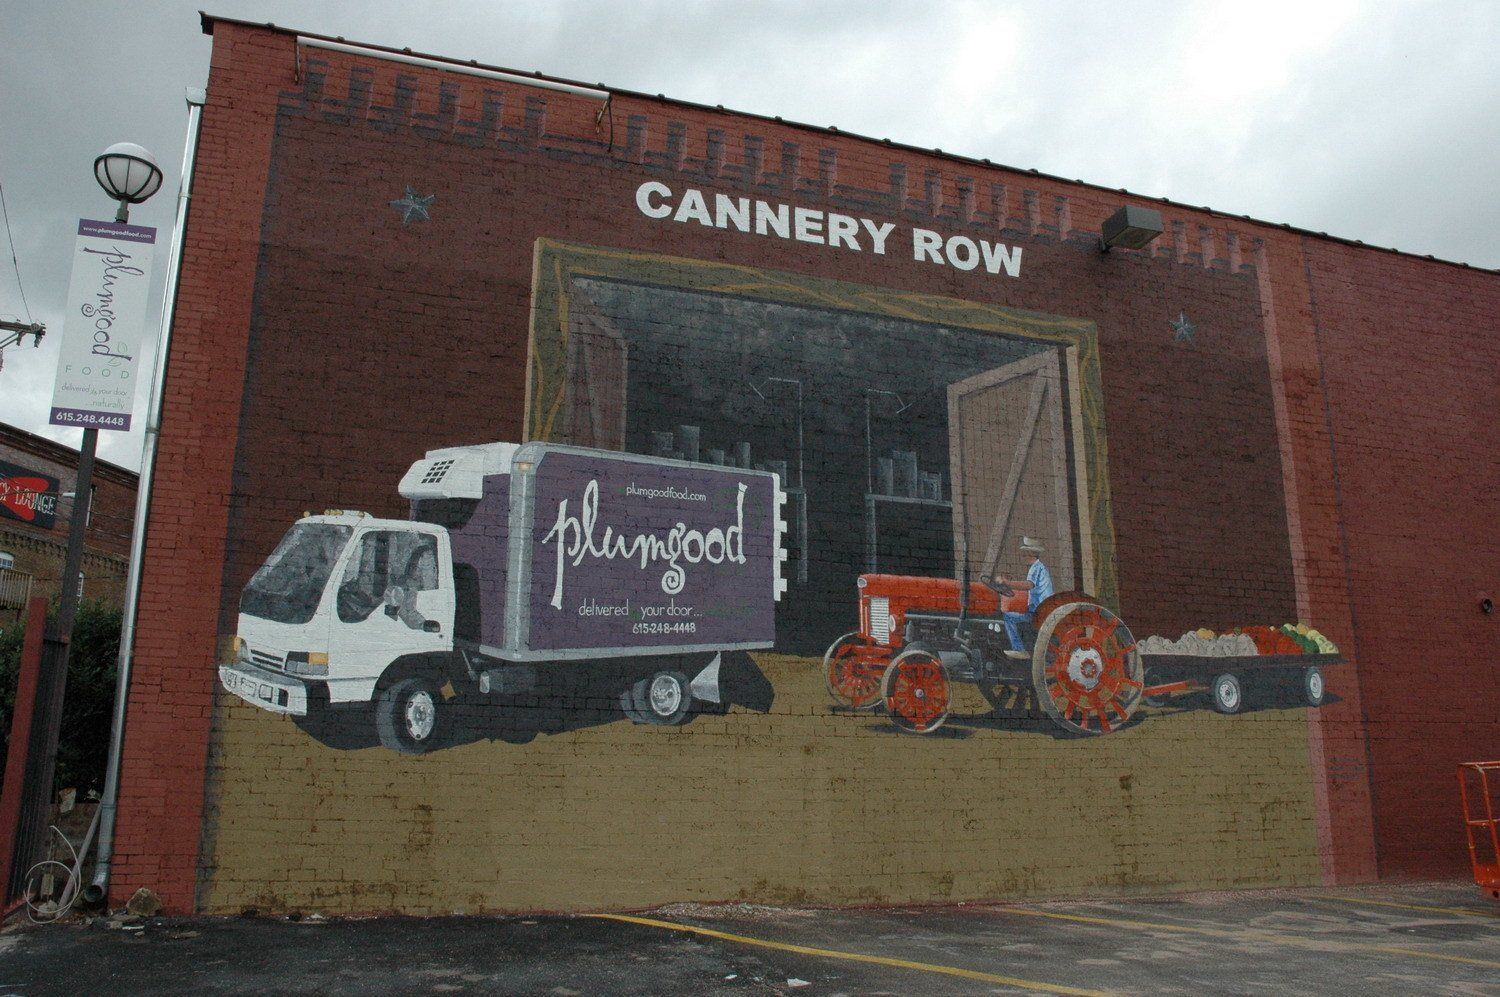 Mural Artist Paints Large-Scale Exterior for Plumgood Food in Nashville TN